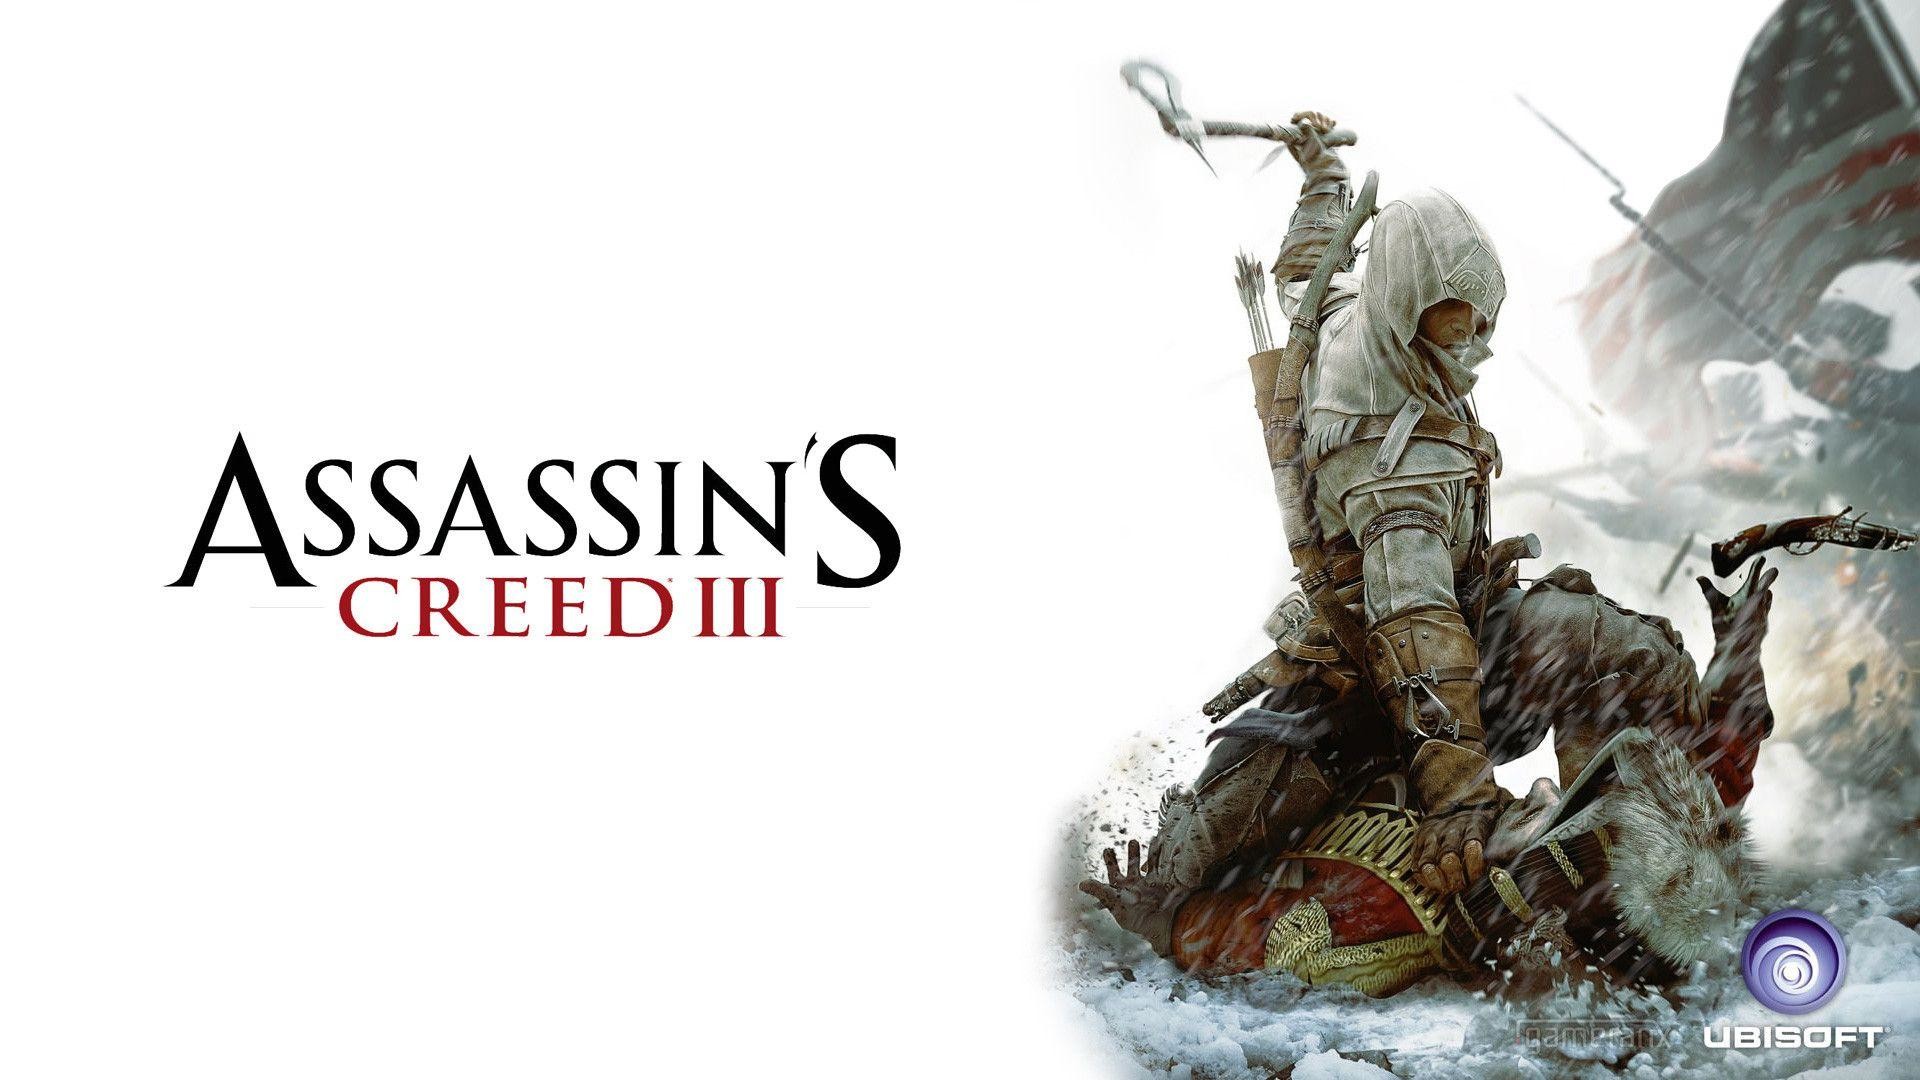 1920x1080 Assassin's Creed 3 Wallpapers in HD